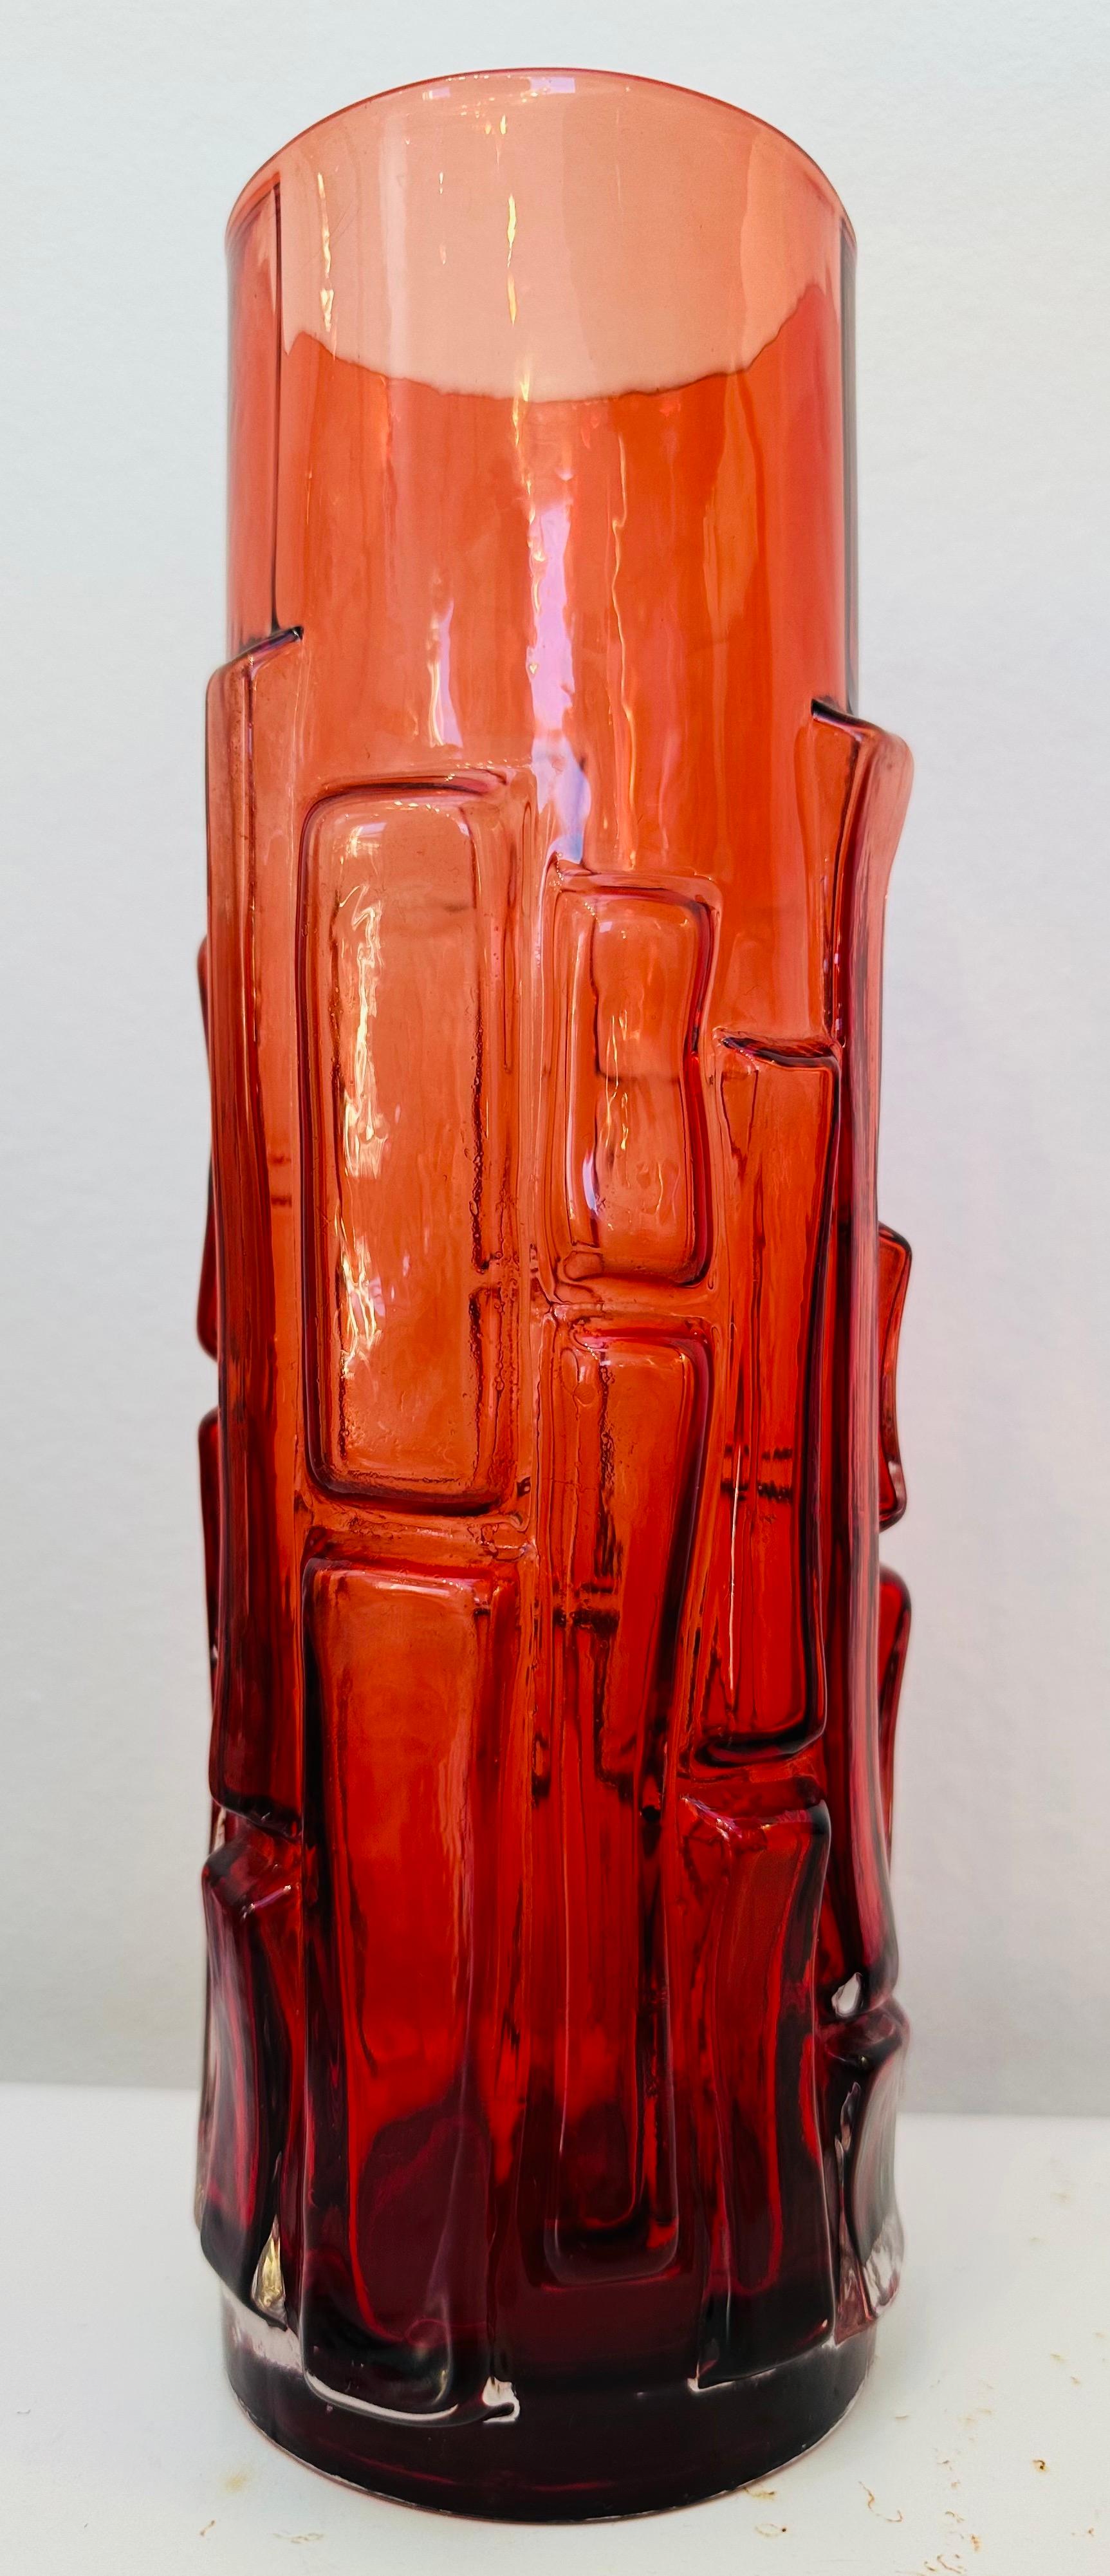 1960s ruby red cased glass vase designed by Bo Borgstrom for Swedish manufacturer Åseda Glasbruk. Product No. B5/832. In very good vintage condition with a very faint 1 cm small scratch towards the top which is barely noticeable. 

Åseda Glasbruk